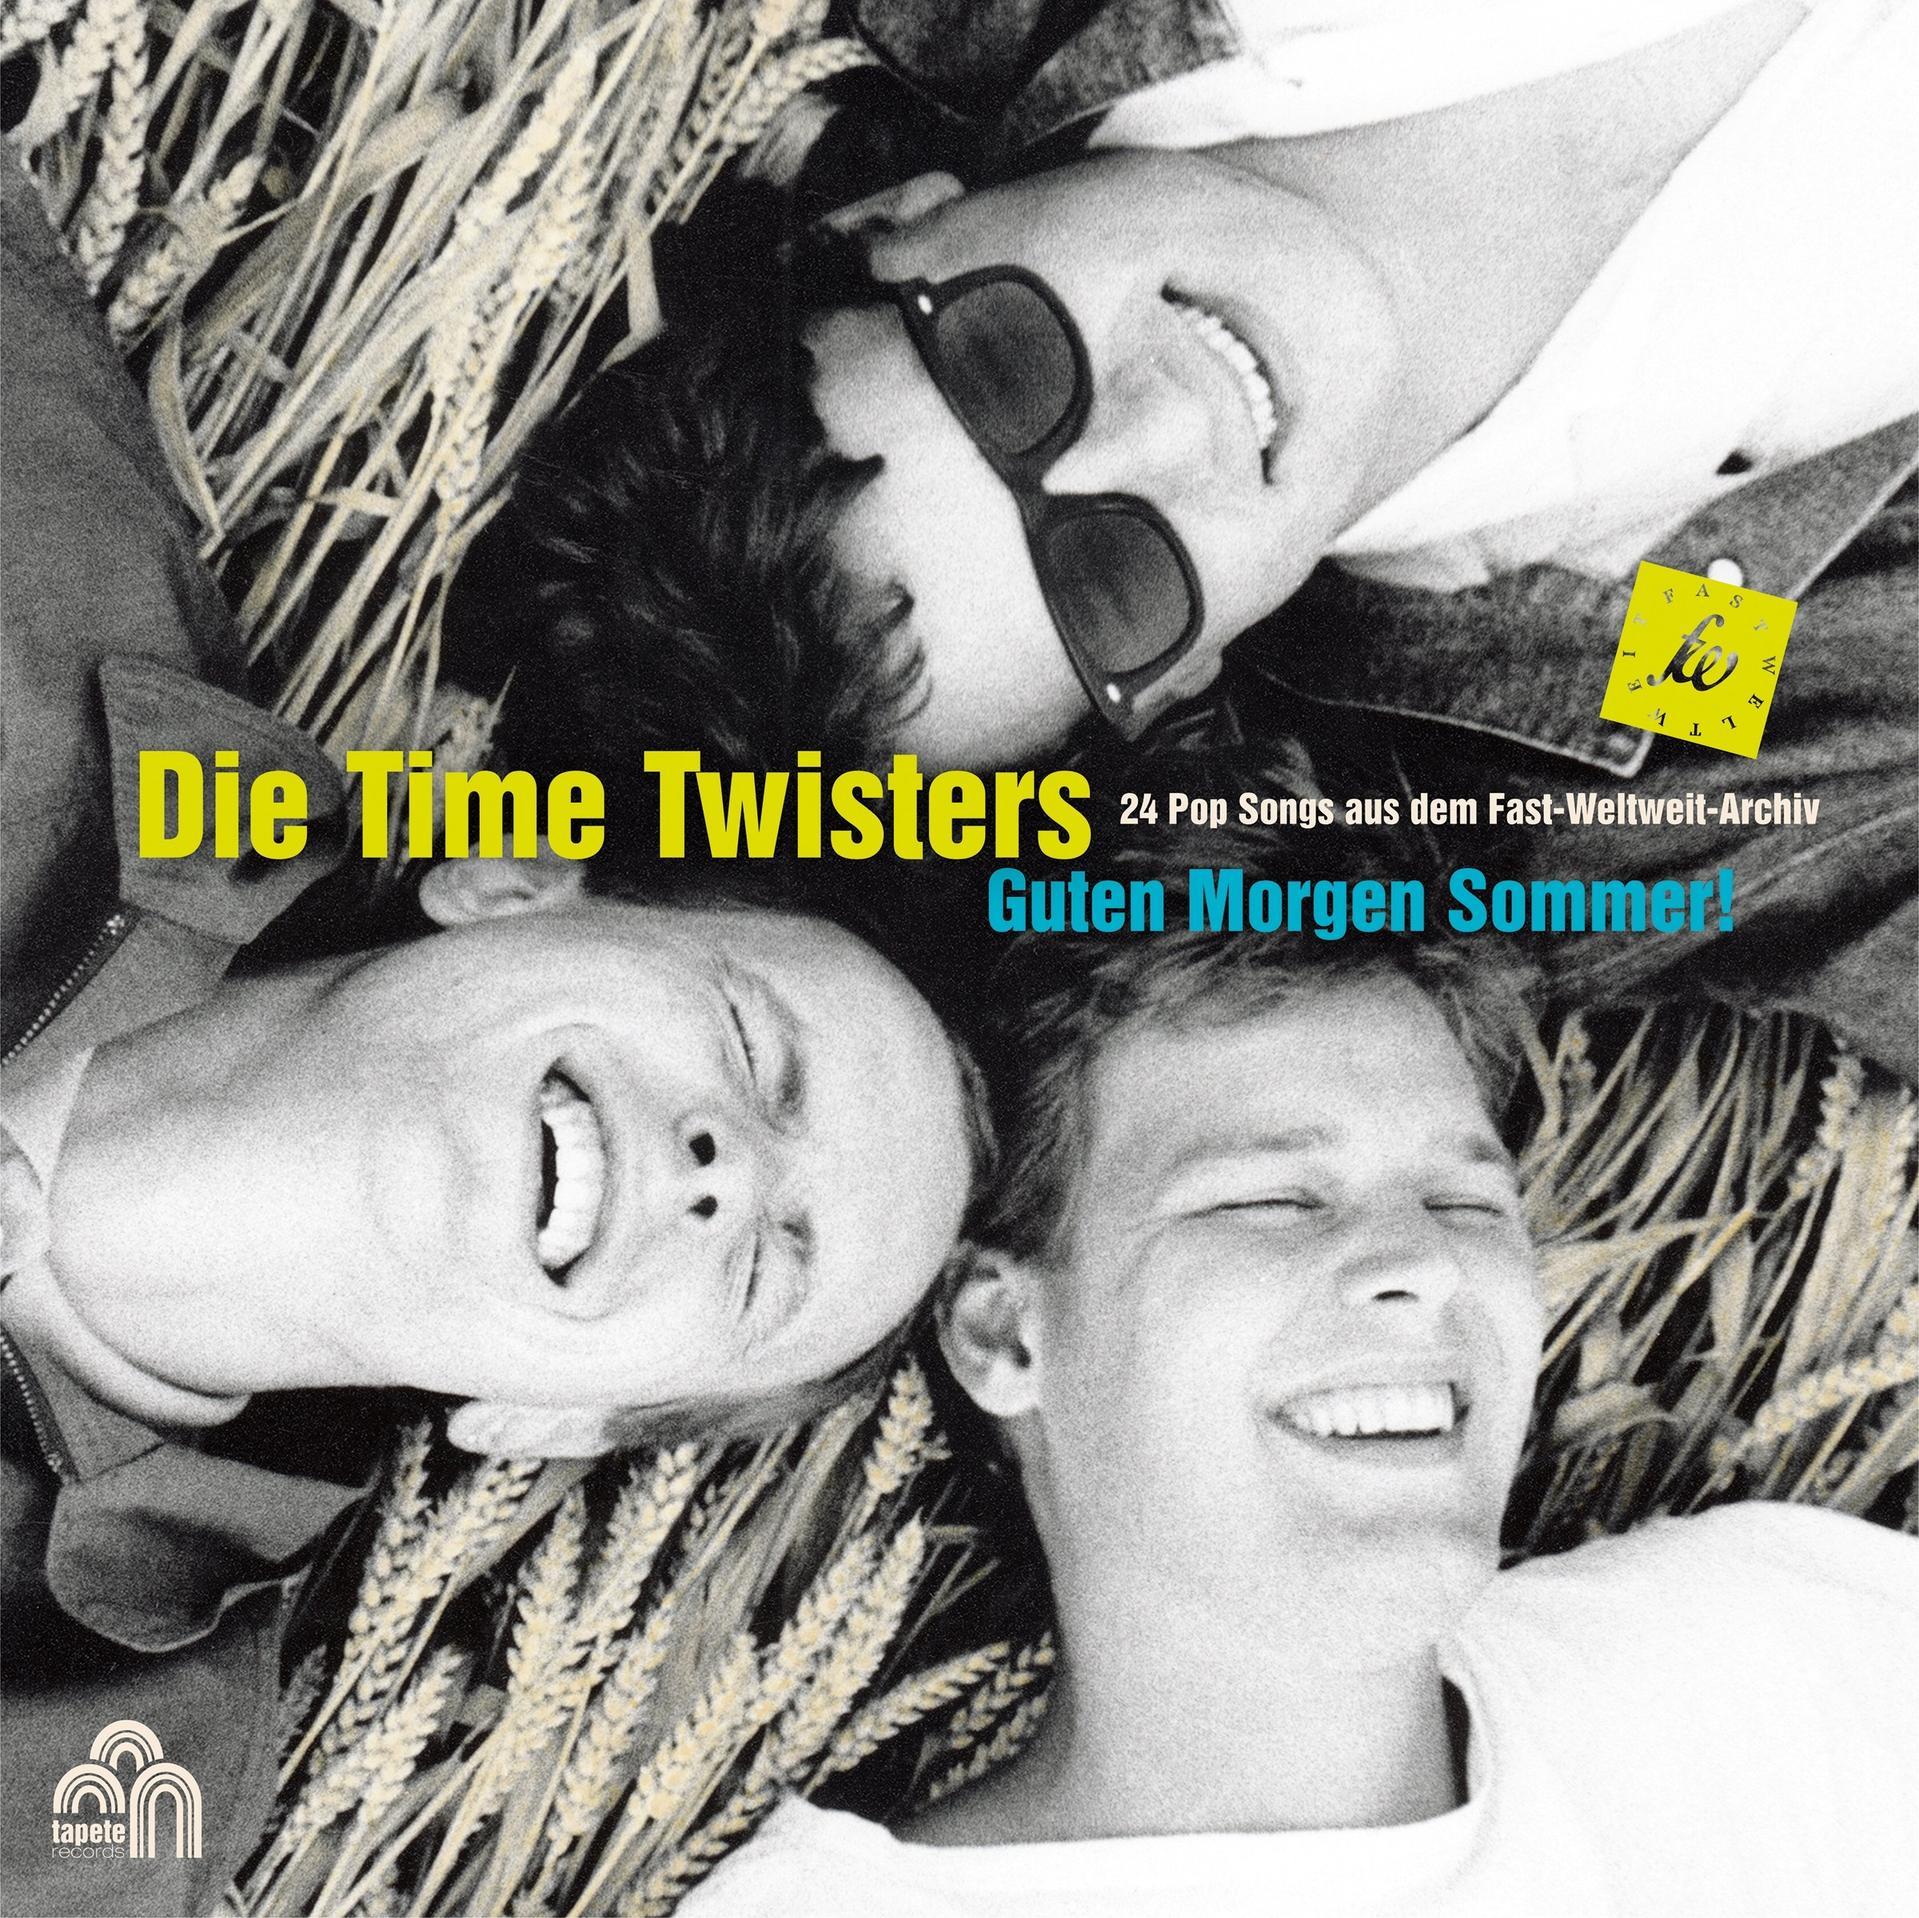 Die Sommer Of (CD) Twisters Time (The - Best - Time Twisters Morgen Guten